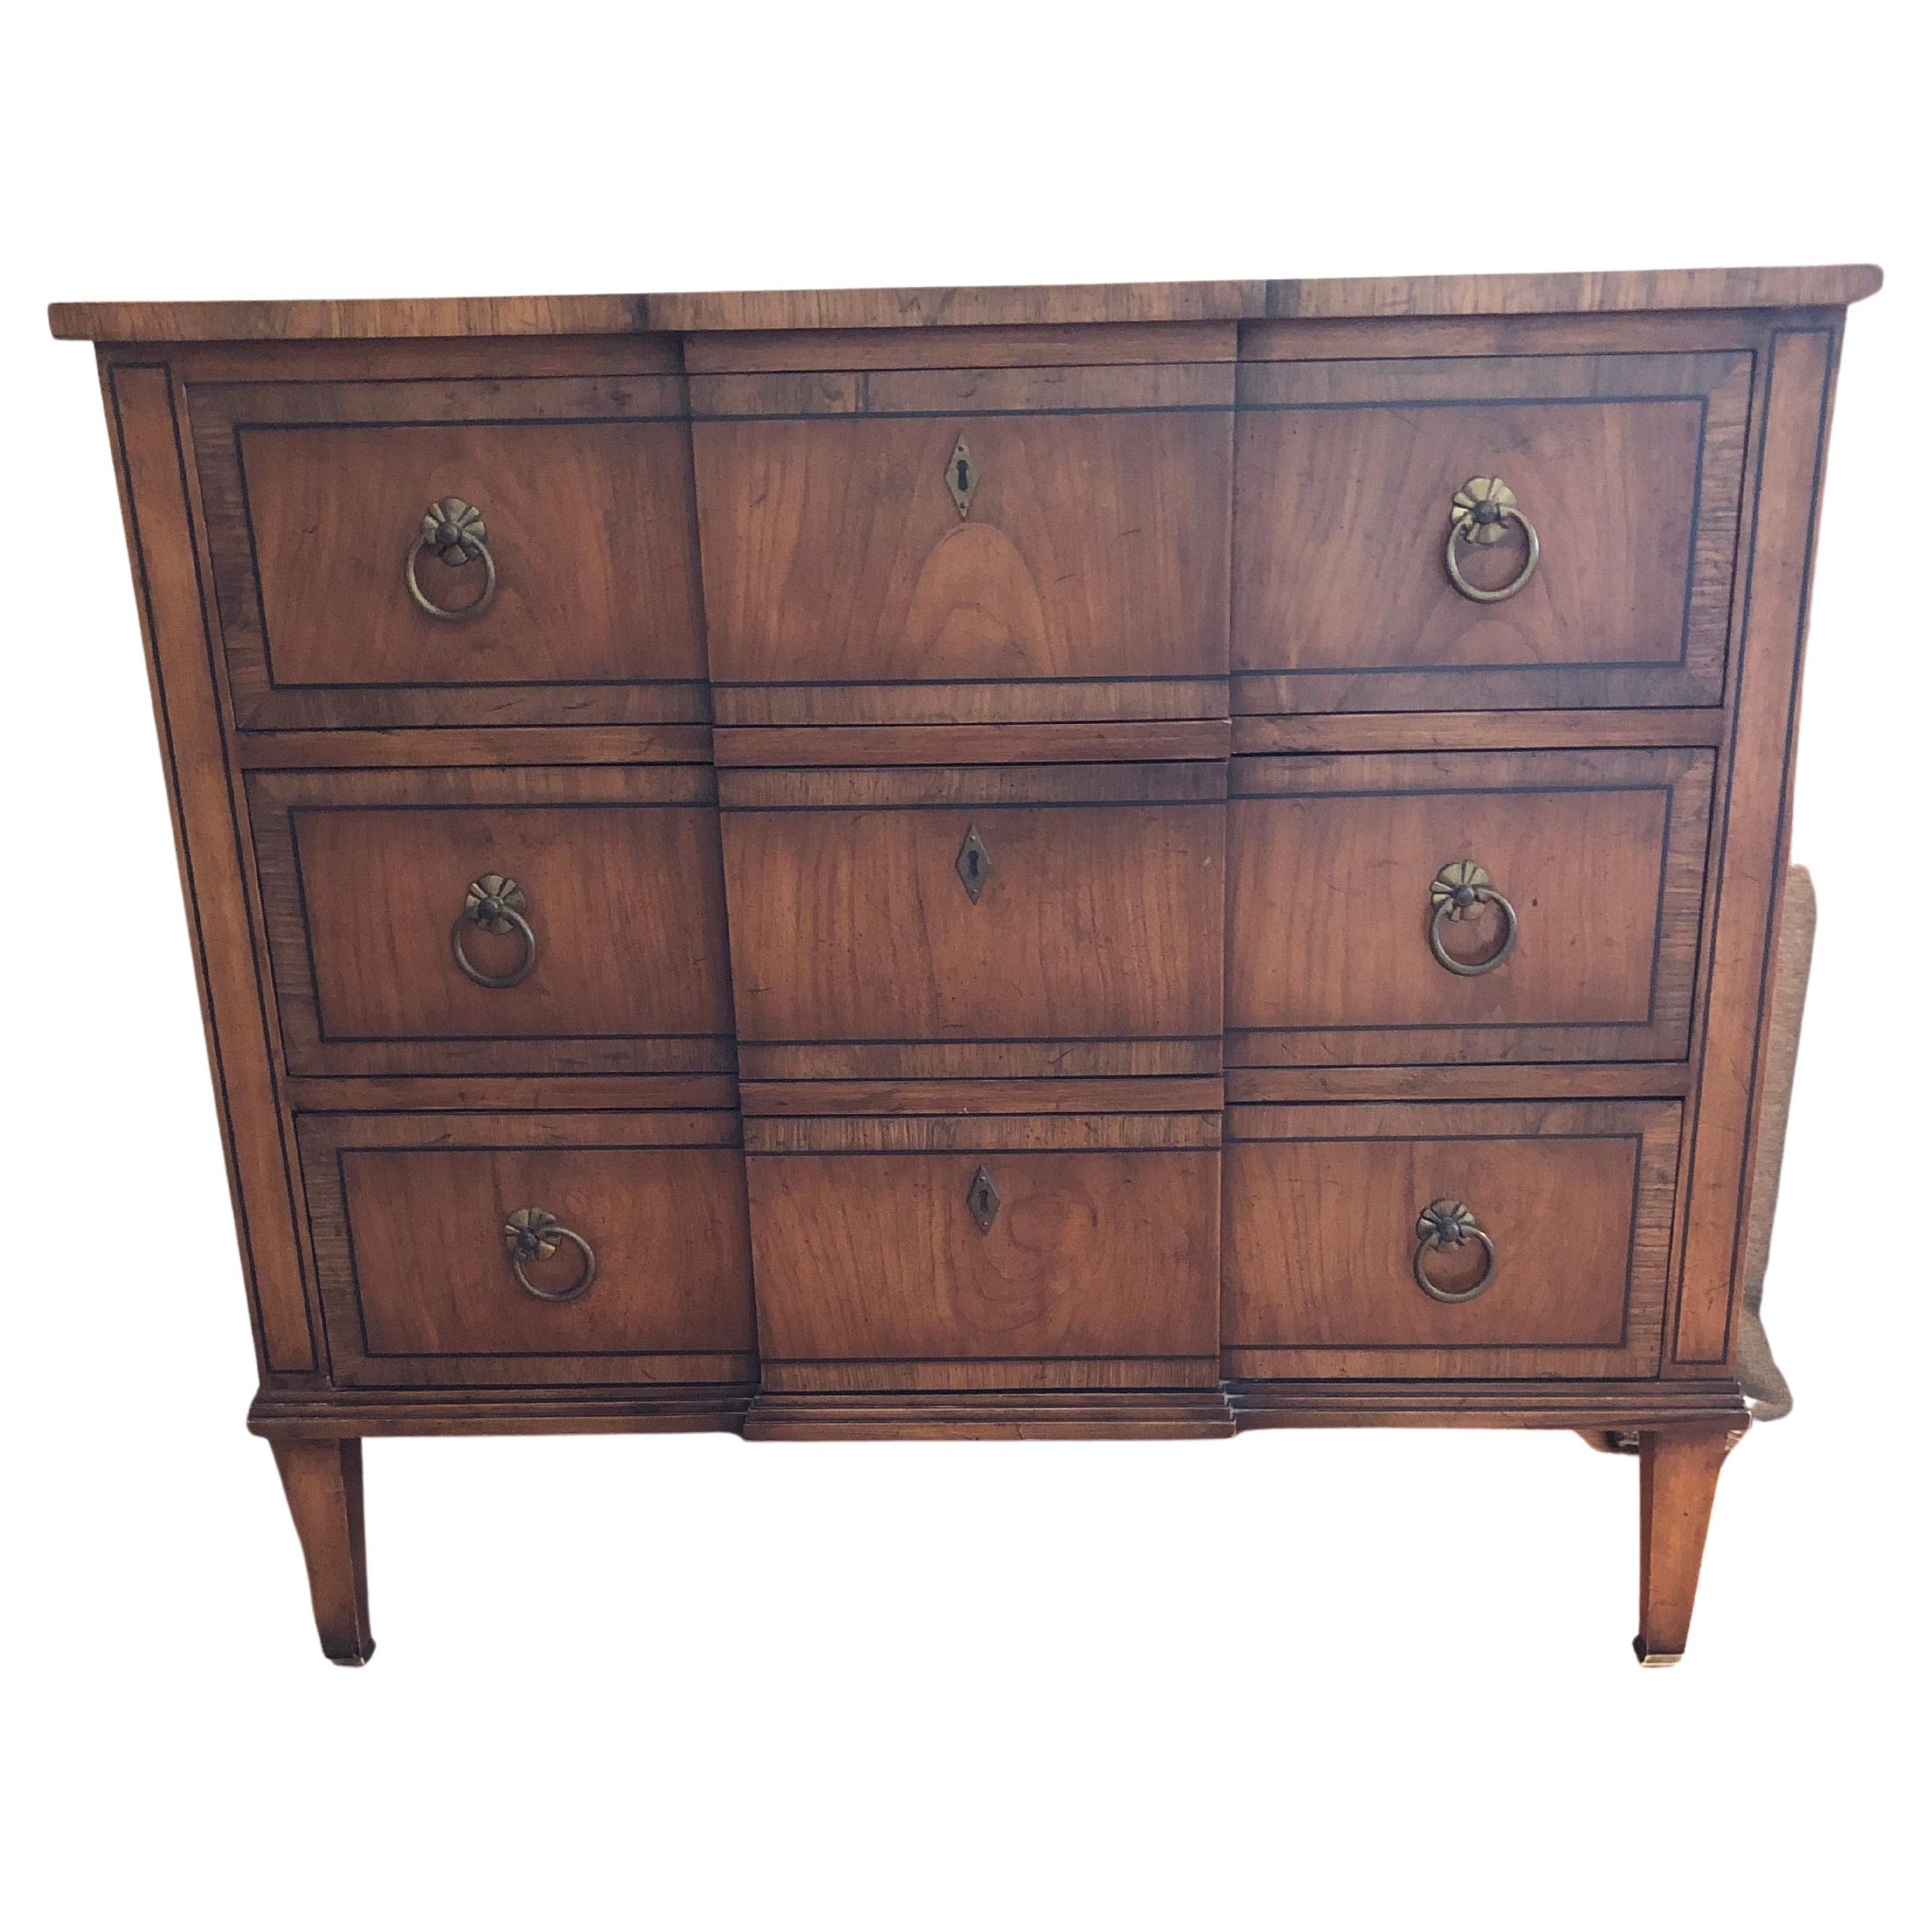 Classic Sheraton style 3 drawer commode having lovely darker inlay wood decoration and original round brass hardware.
Measures: 18 D except for middle that juts out 1/2 inch.
 